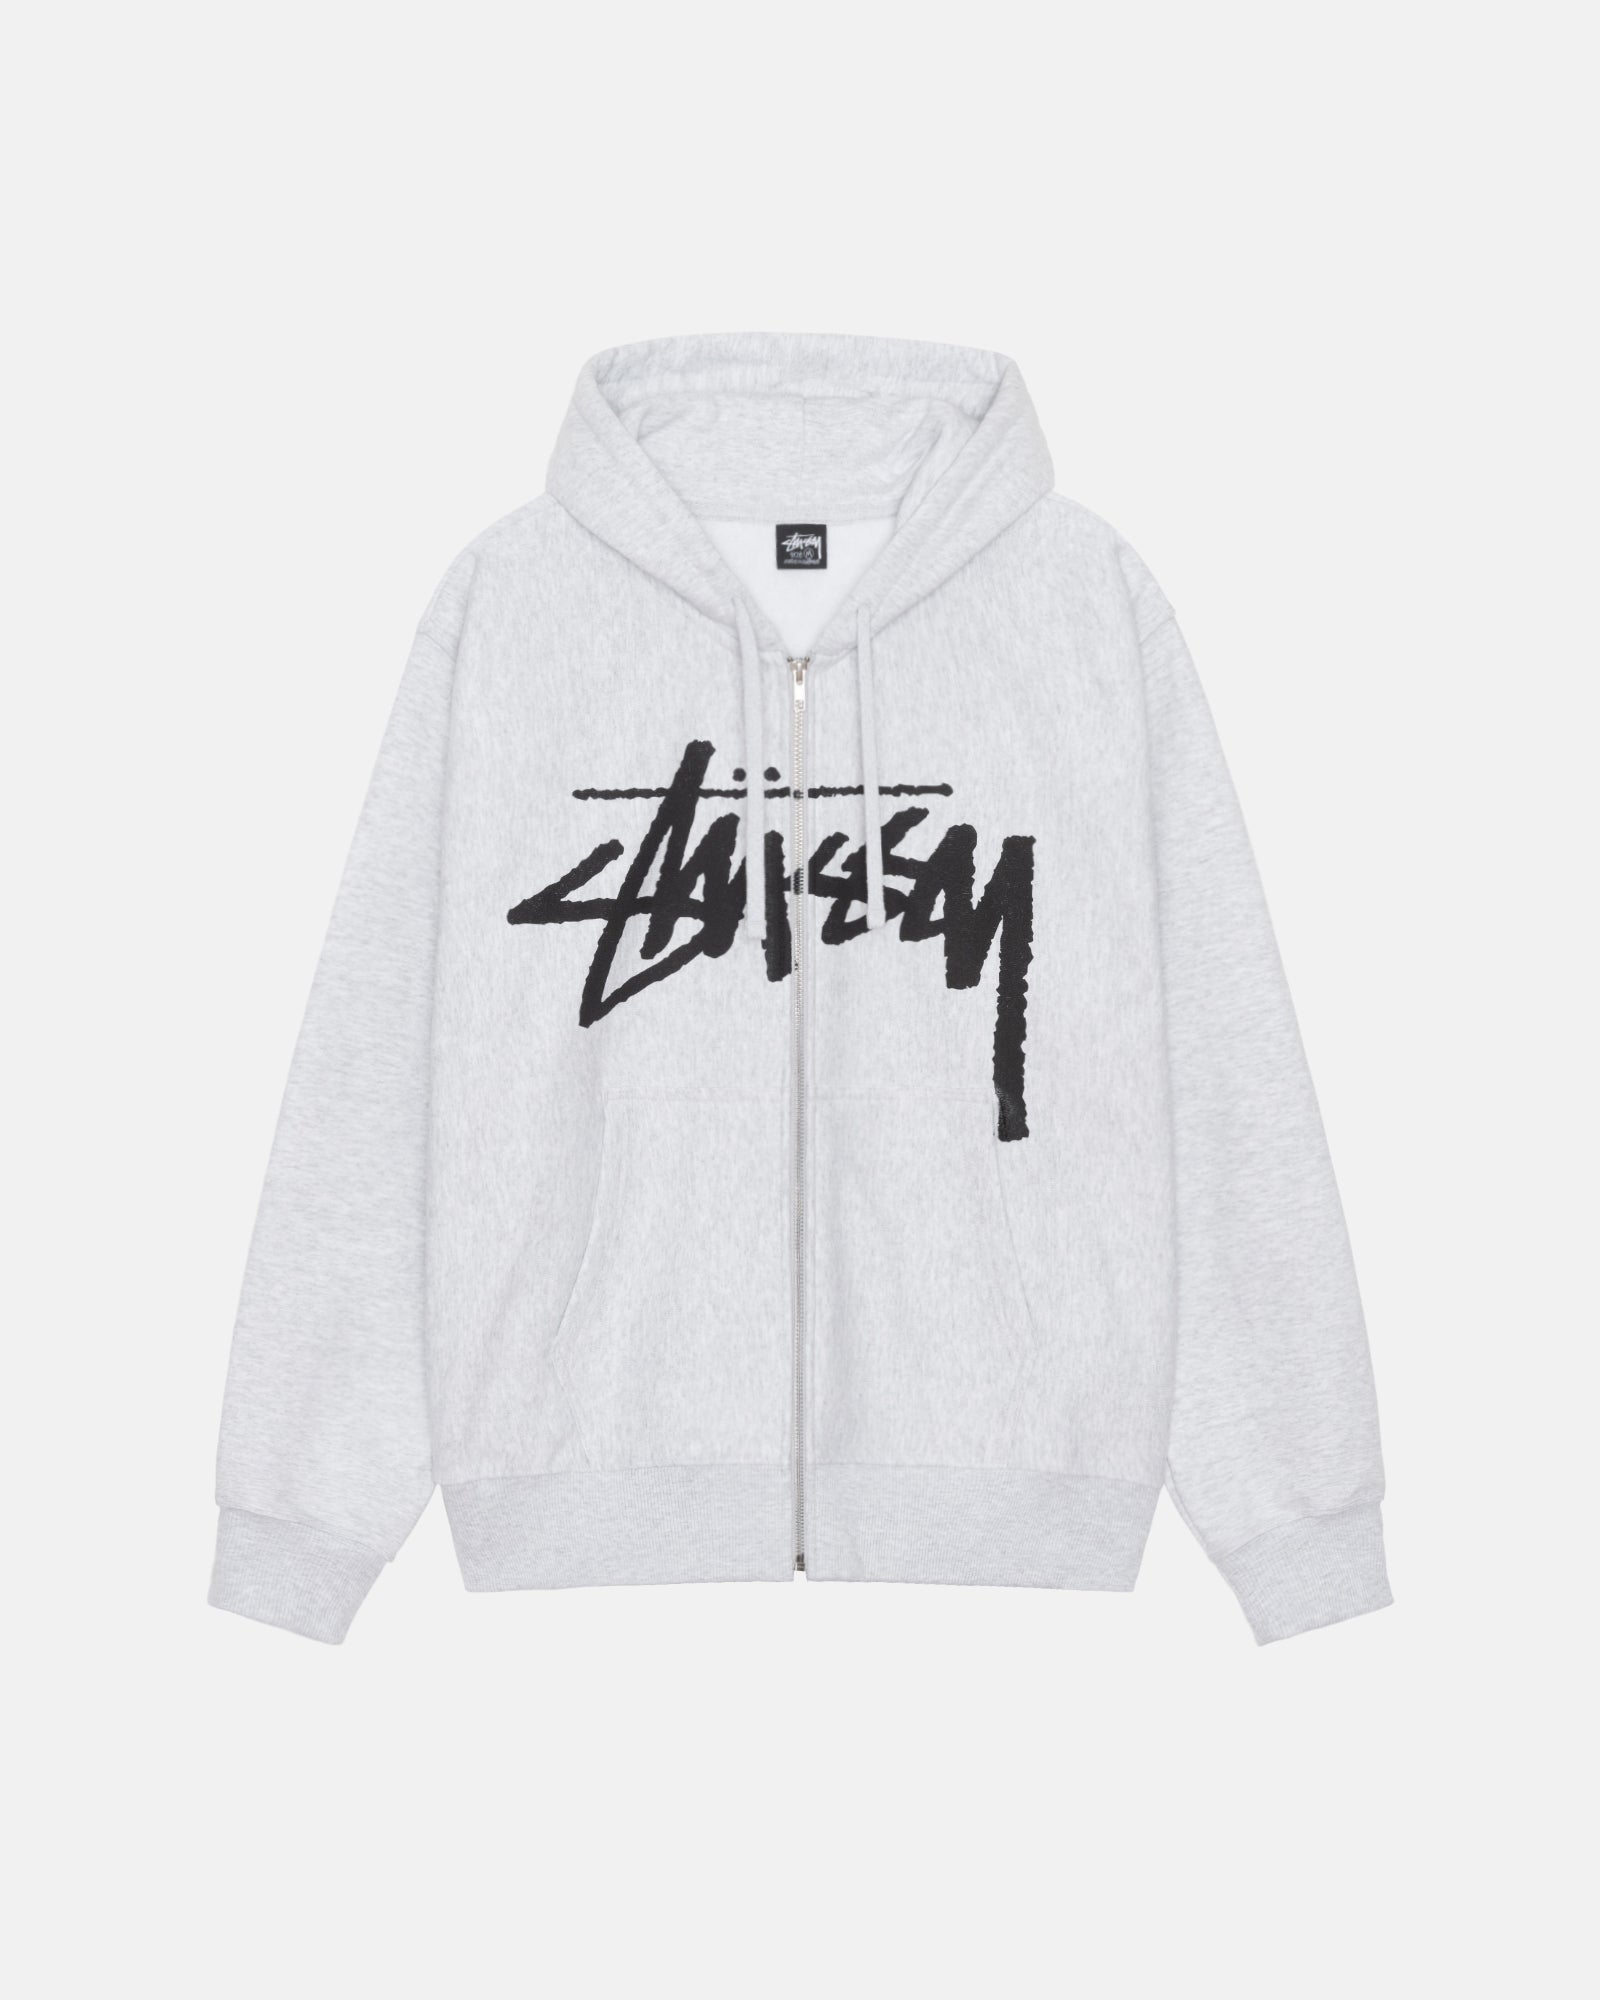 Sweats: Embroidered, Overdyed Fleece Sweatshirts by Stüssy | South